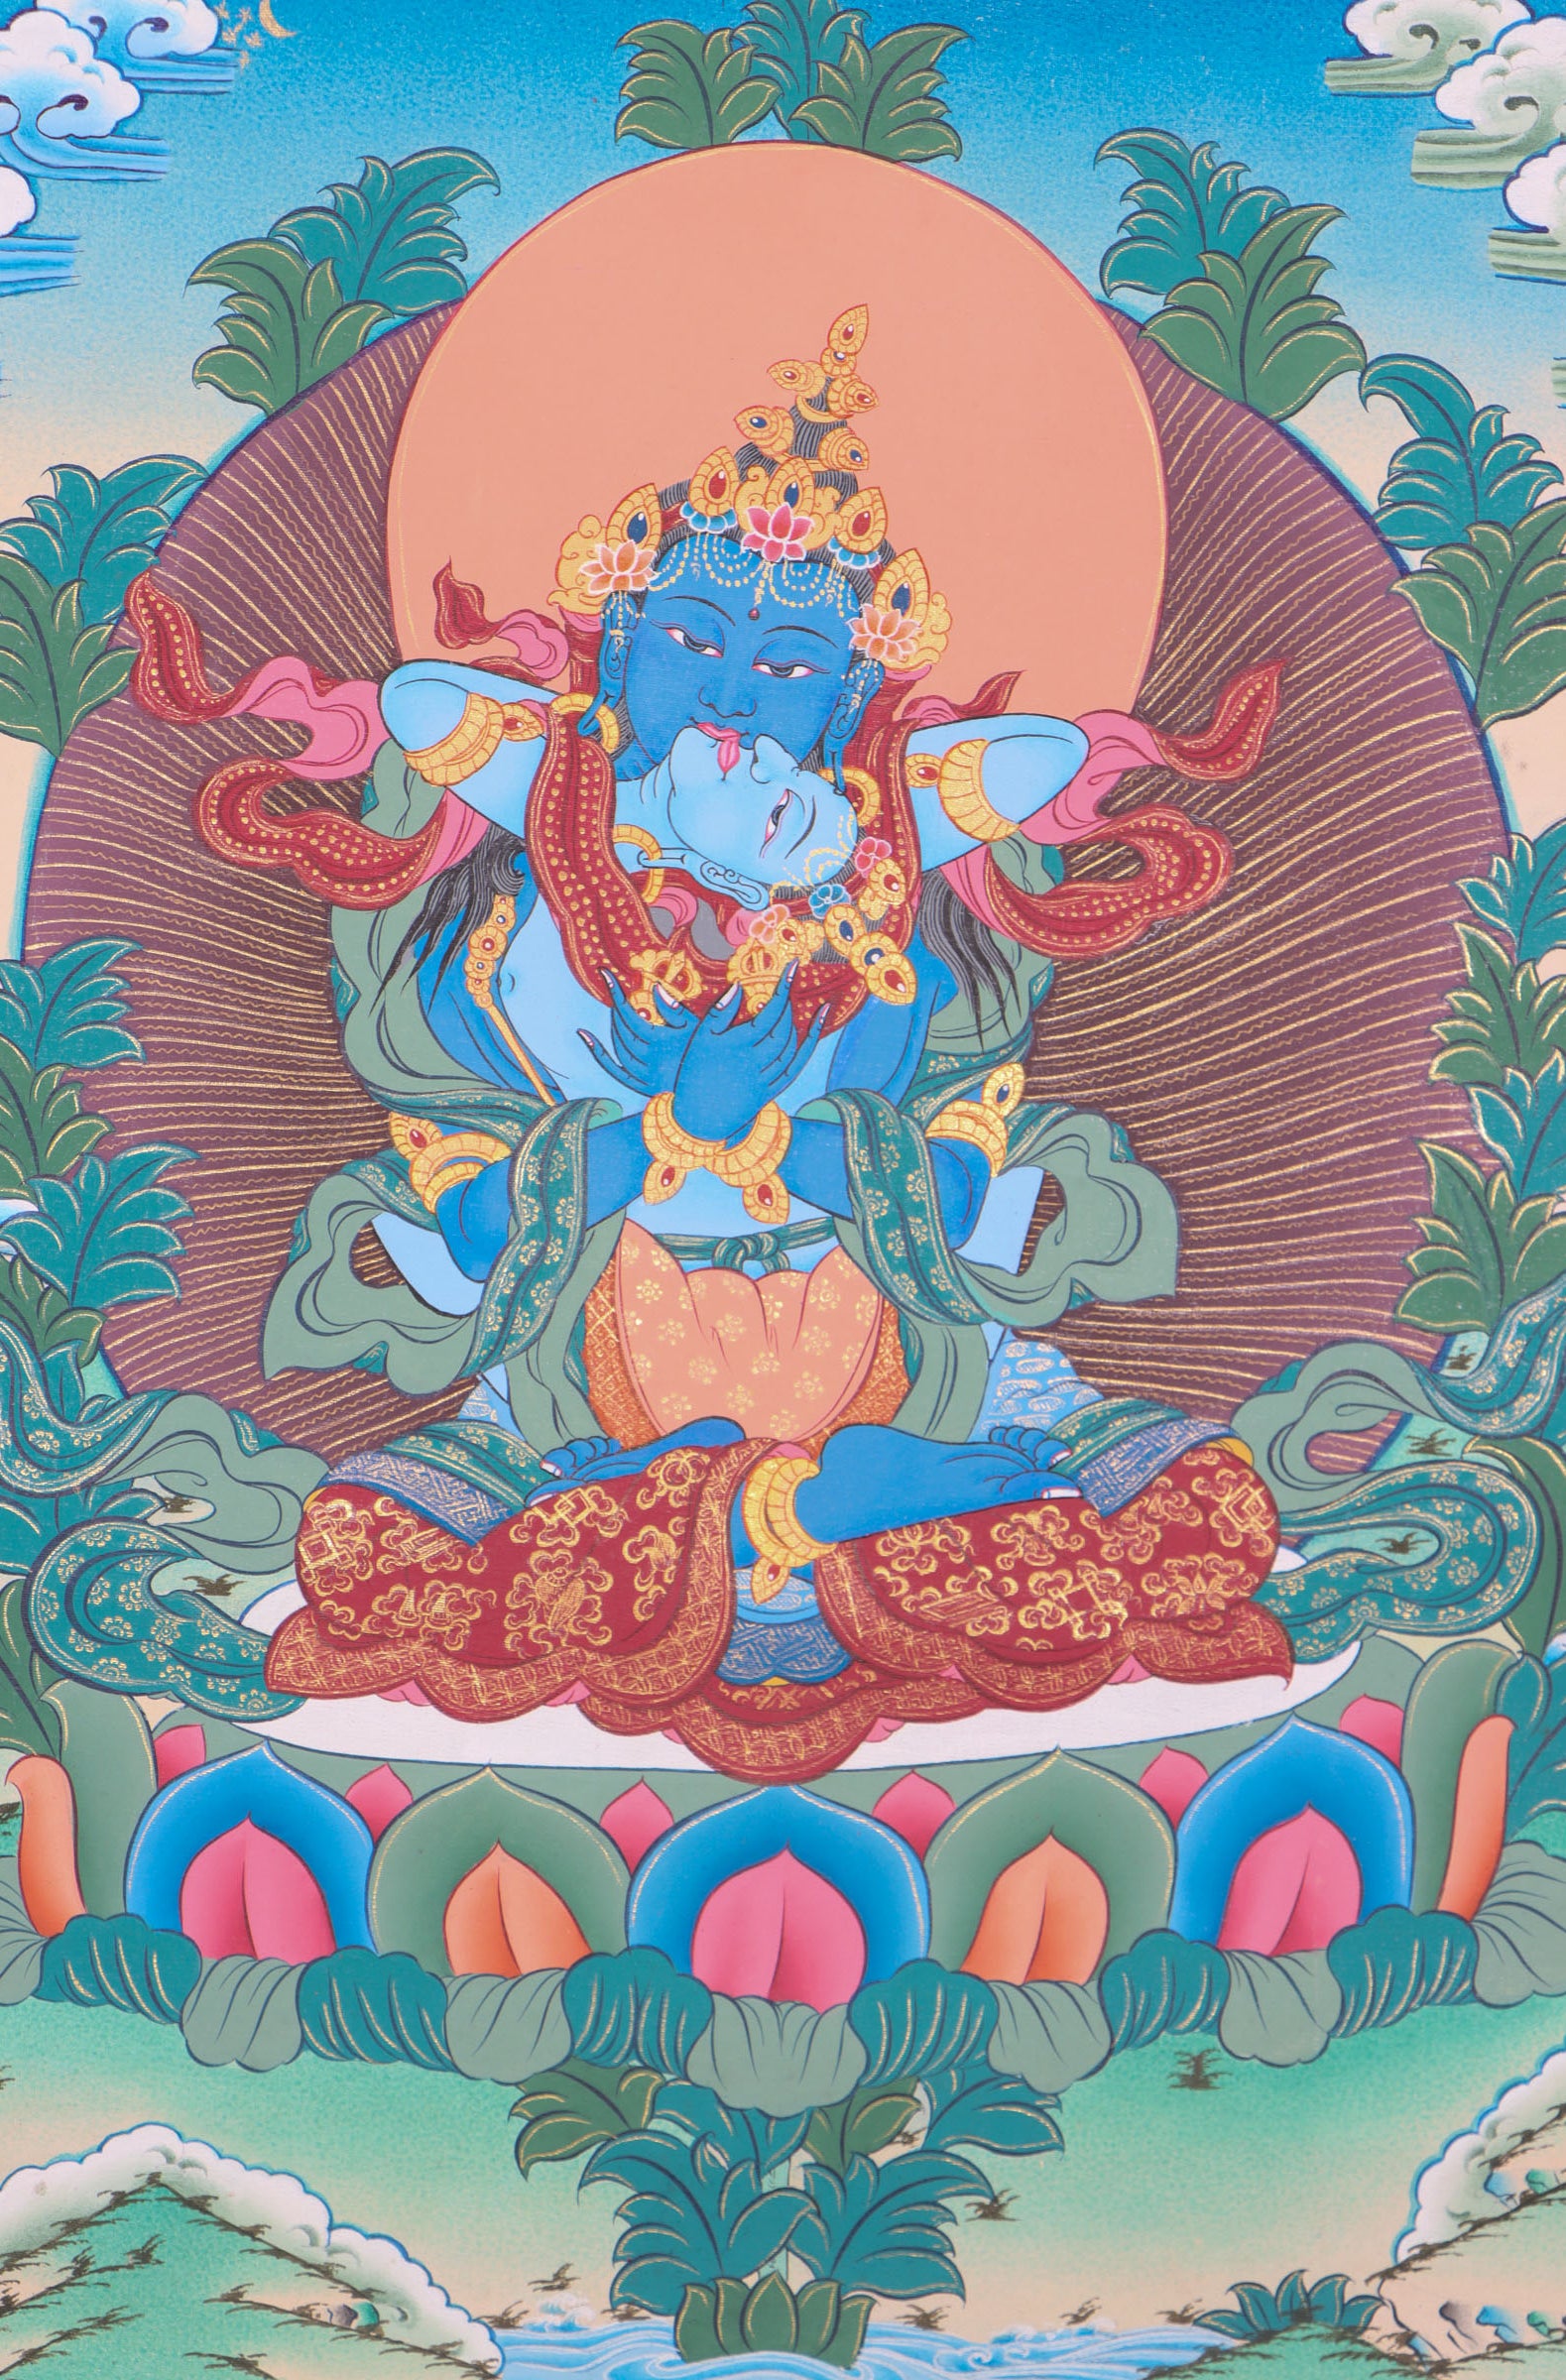 Vajradhara Shakti Thangka Painting for knowledge and compassion in the path to awakening.